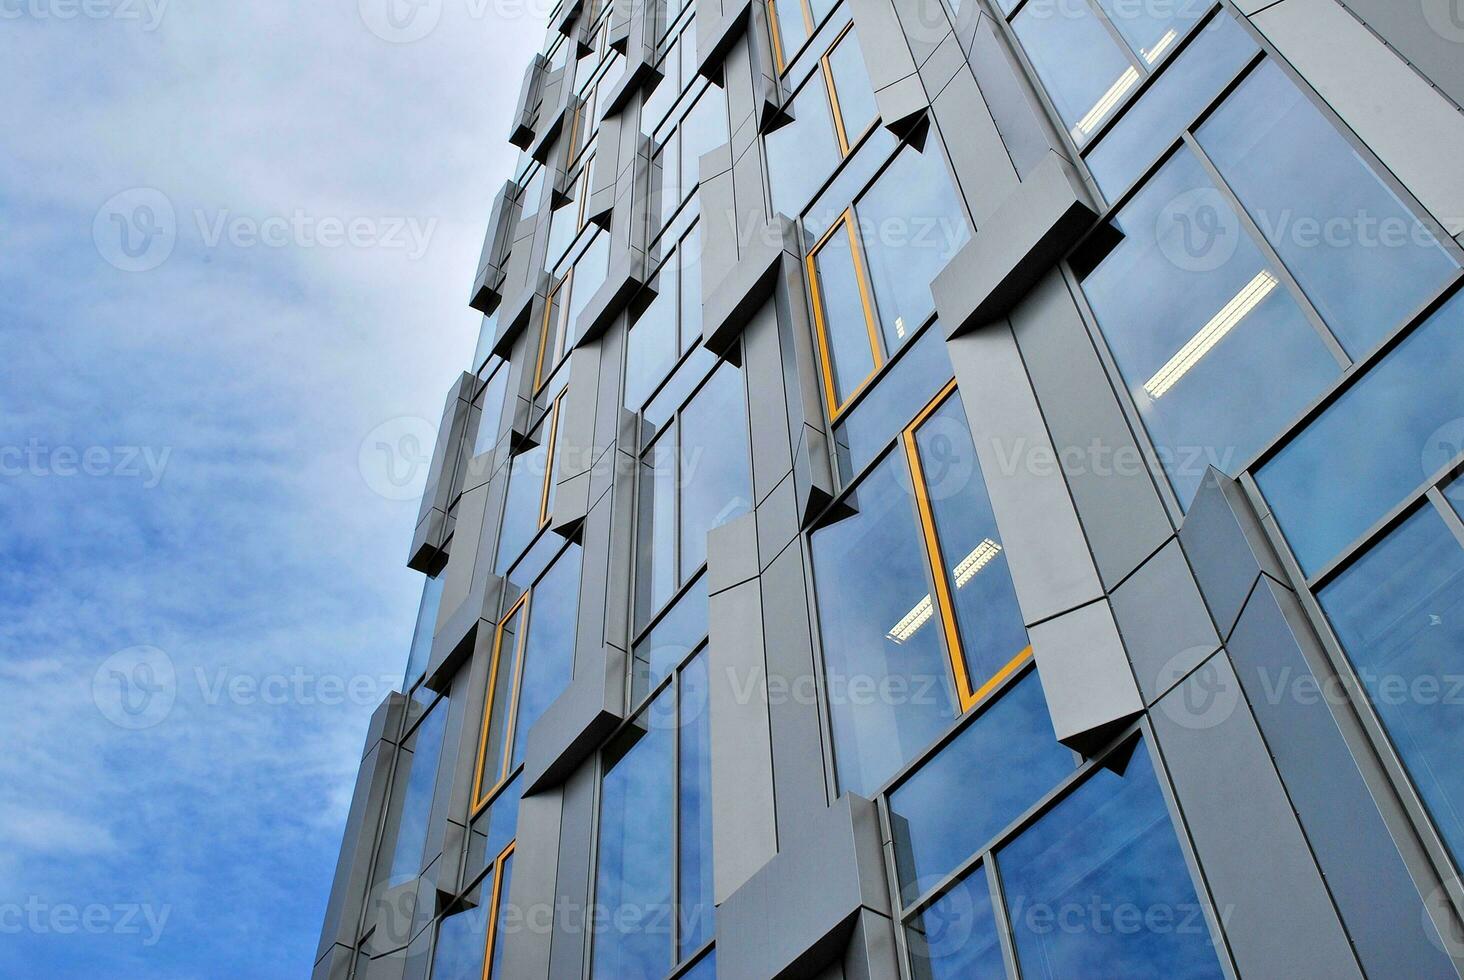 Fragment of glass and metal facade walls. Commercial office buildings. Abstract modern business architecture. photo